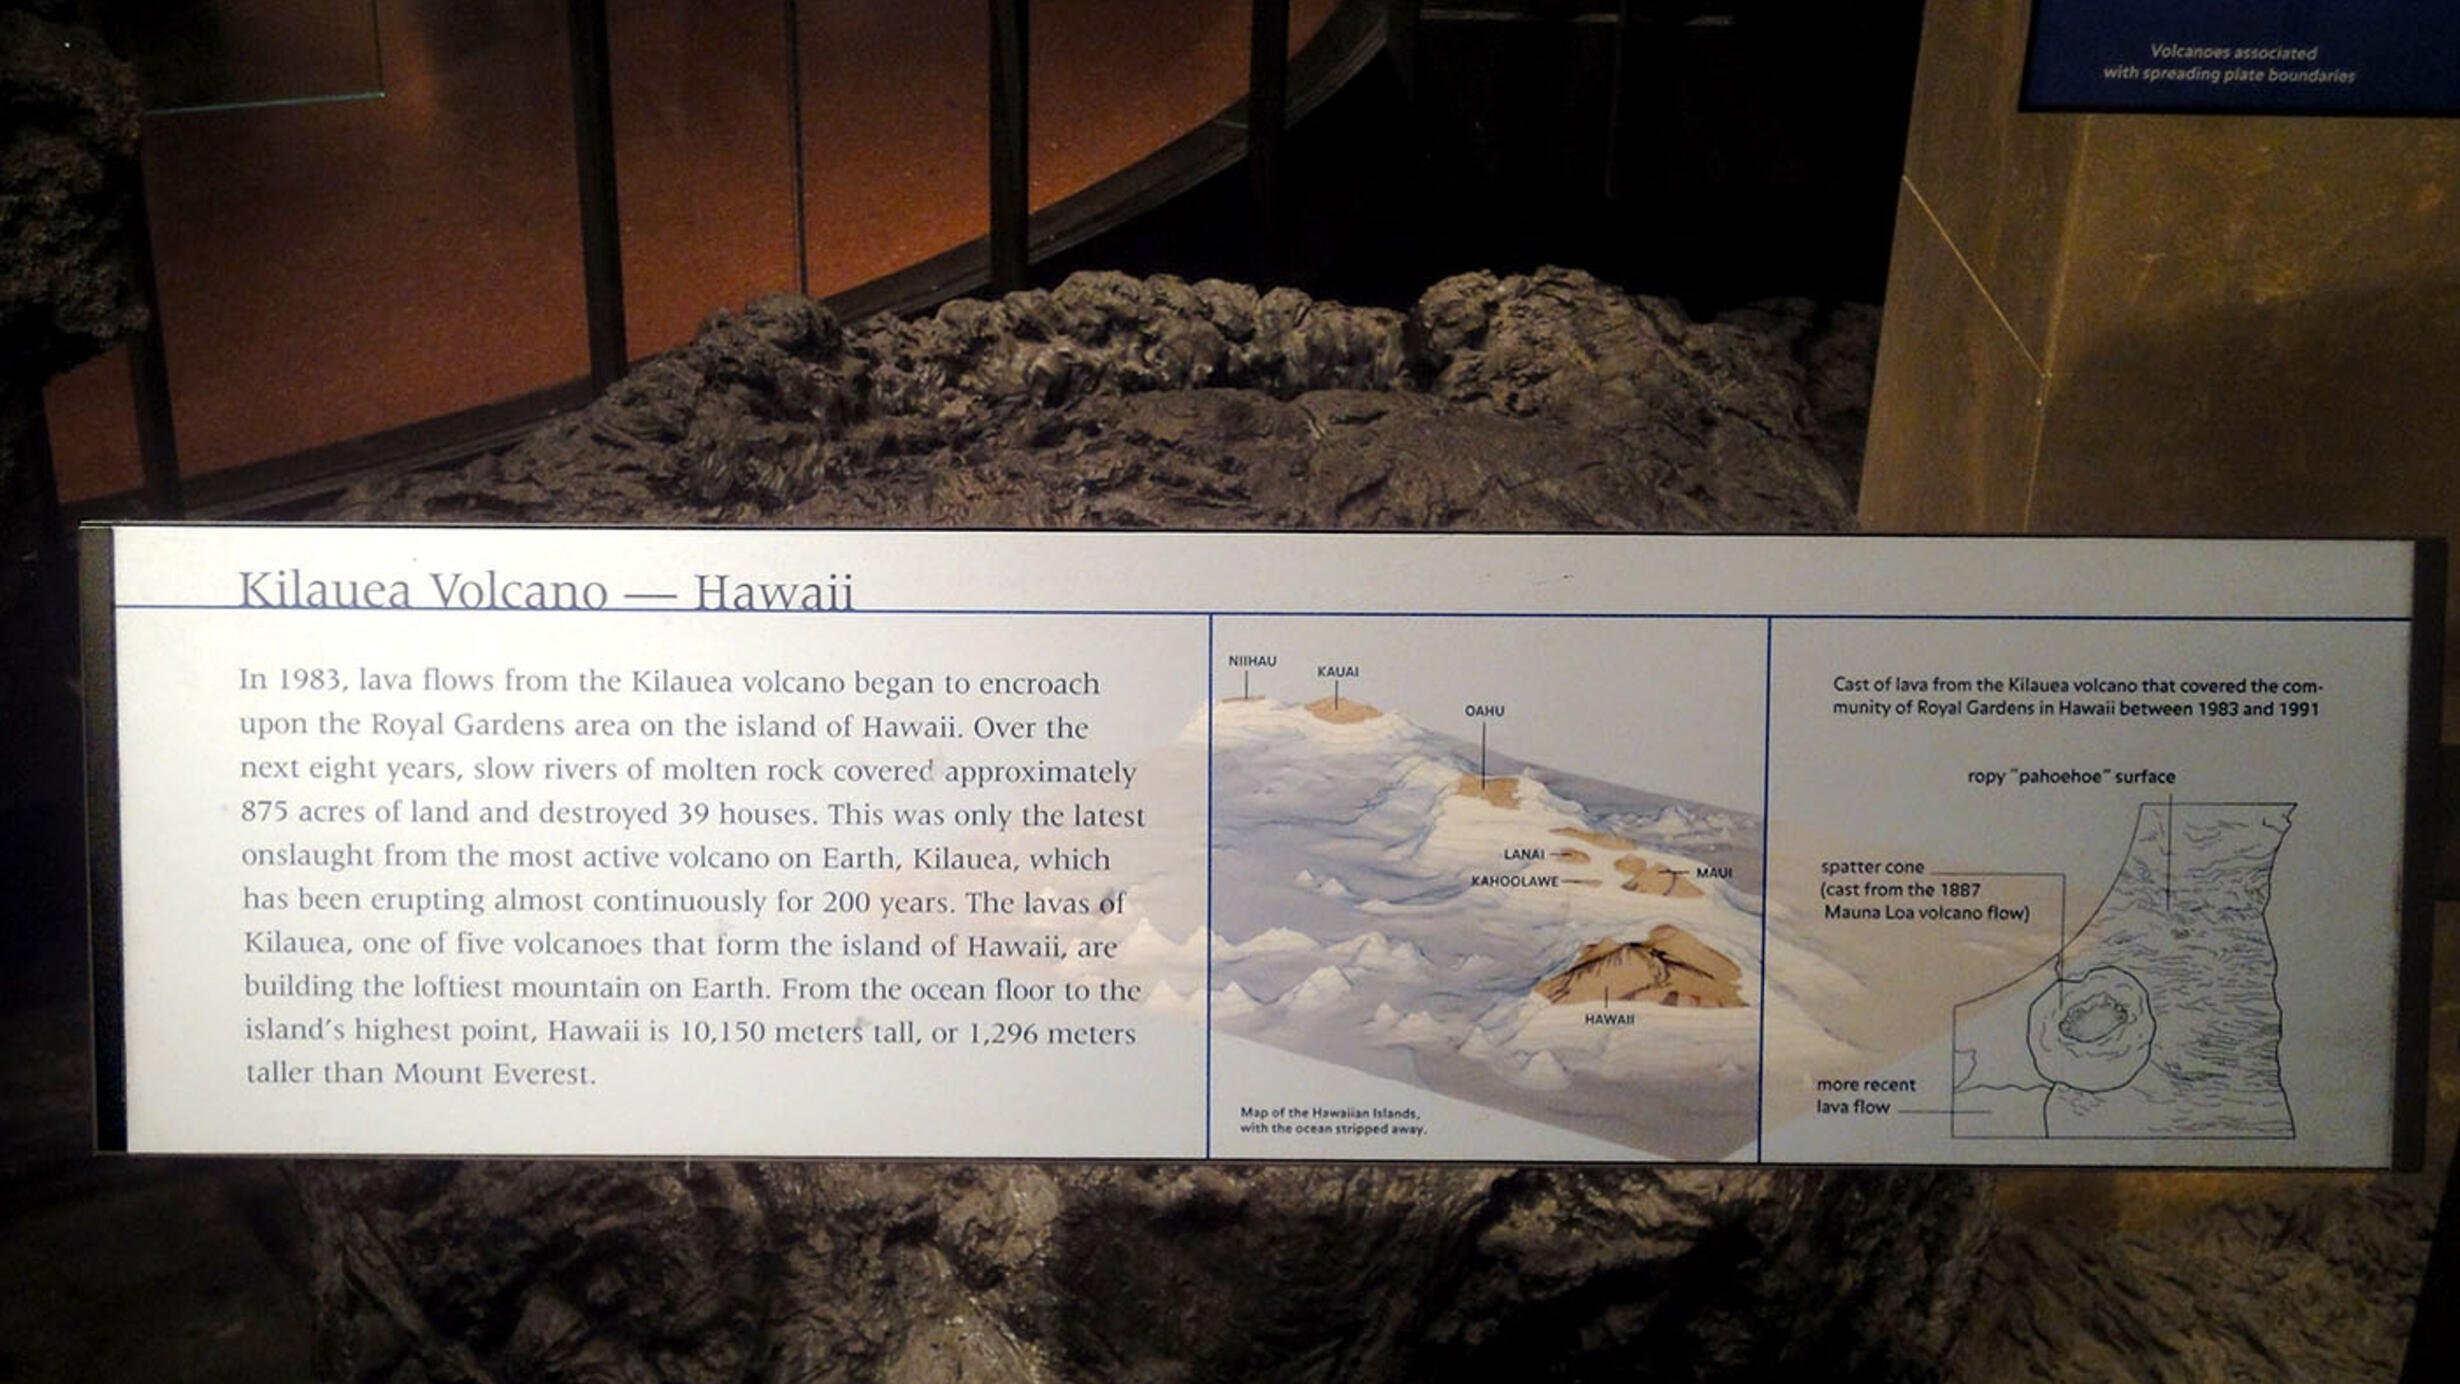 Cast of lava from the Kilauea volcano on display with a large label explaining the history of the 1983 eruption of the Kilauea volcano in Hawaii.